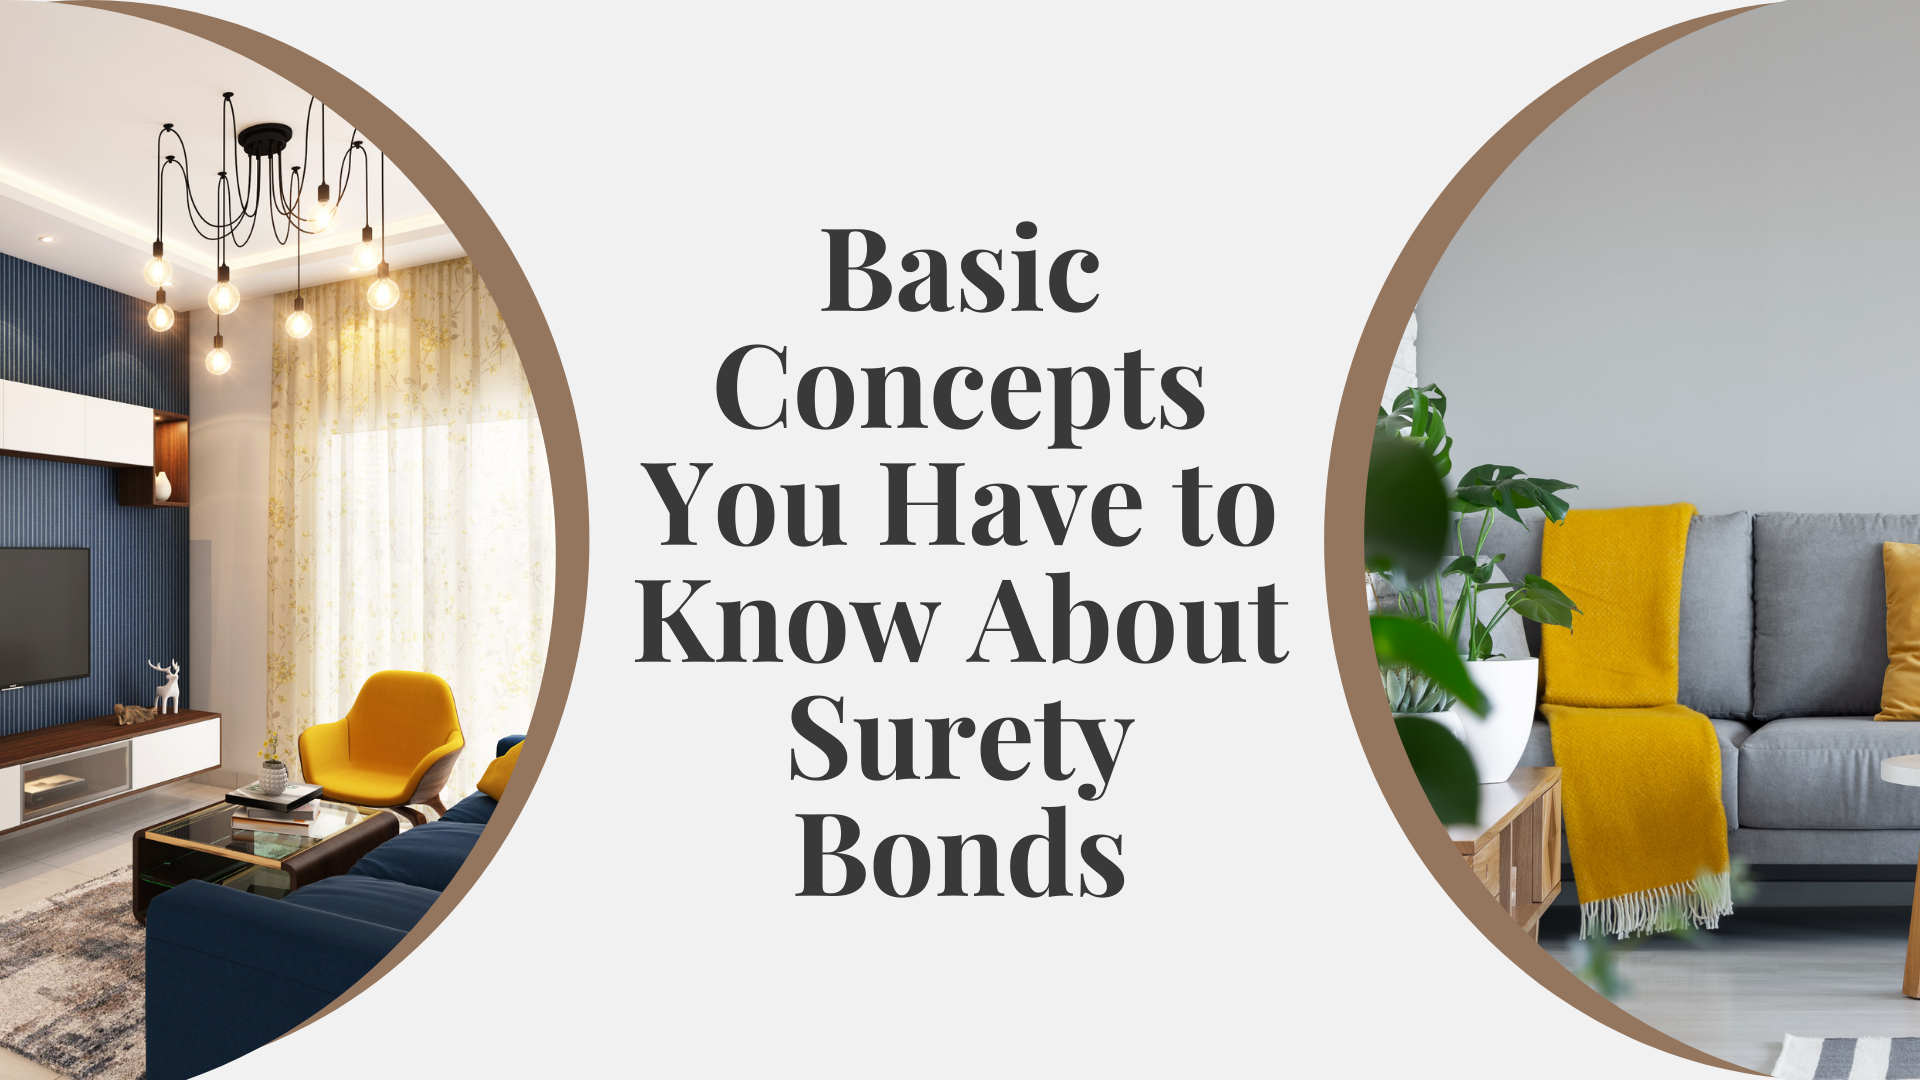 surety bond - What are the differences between a Surety Bond and an Insurance Policy - minimalist home